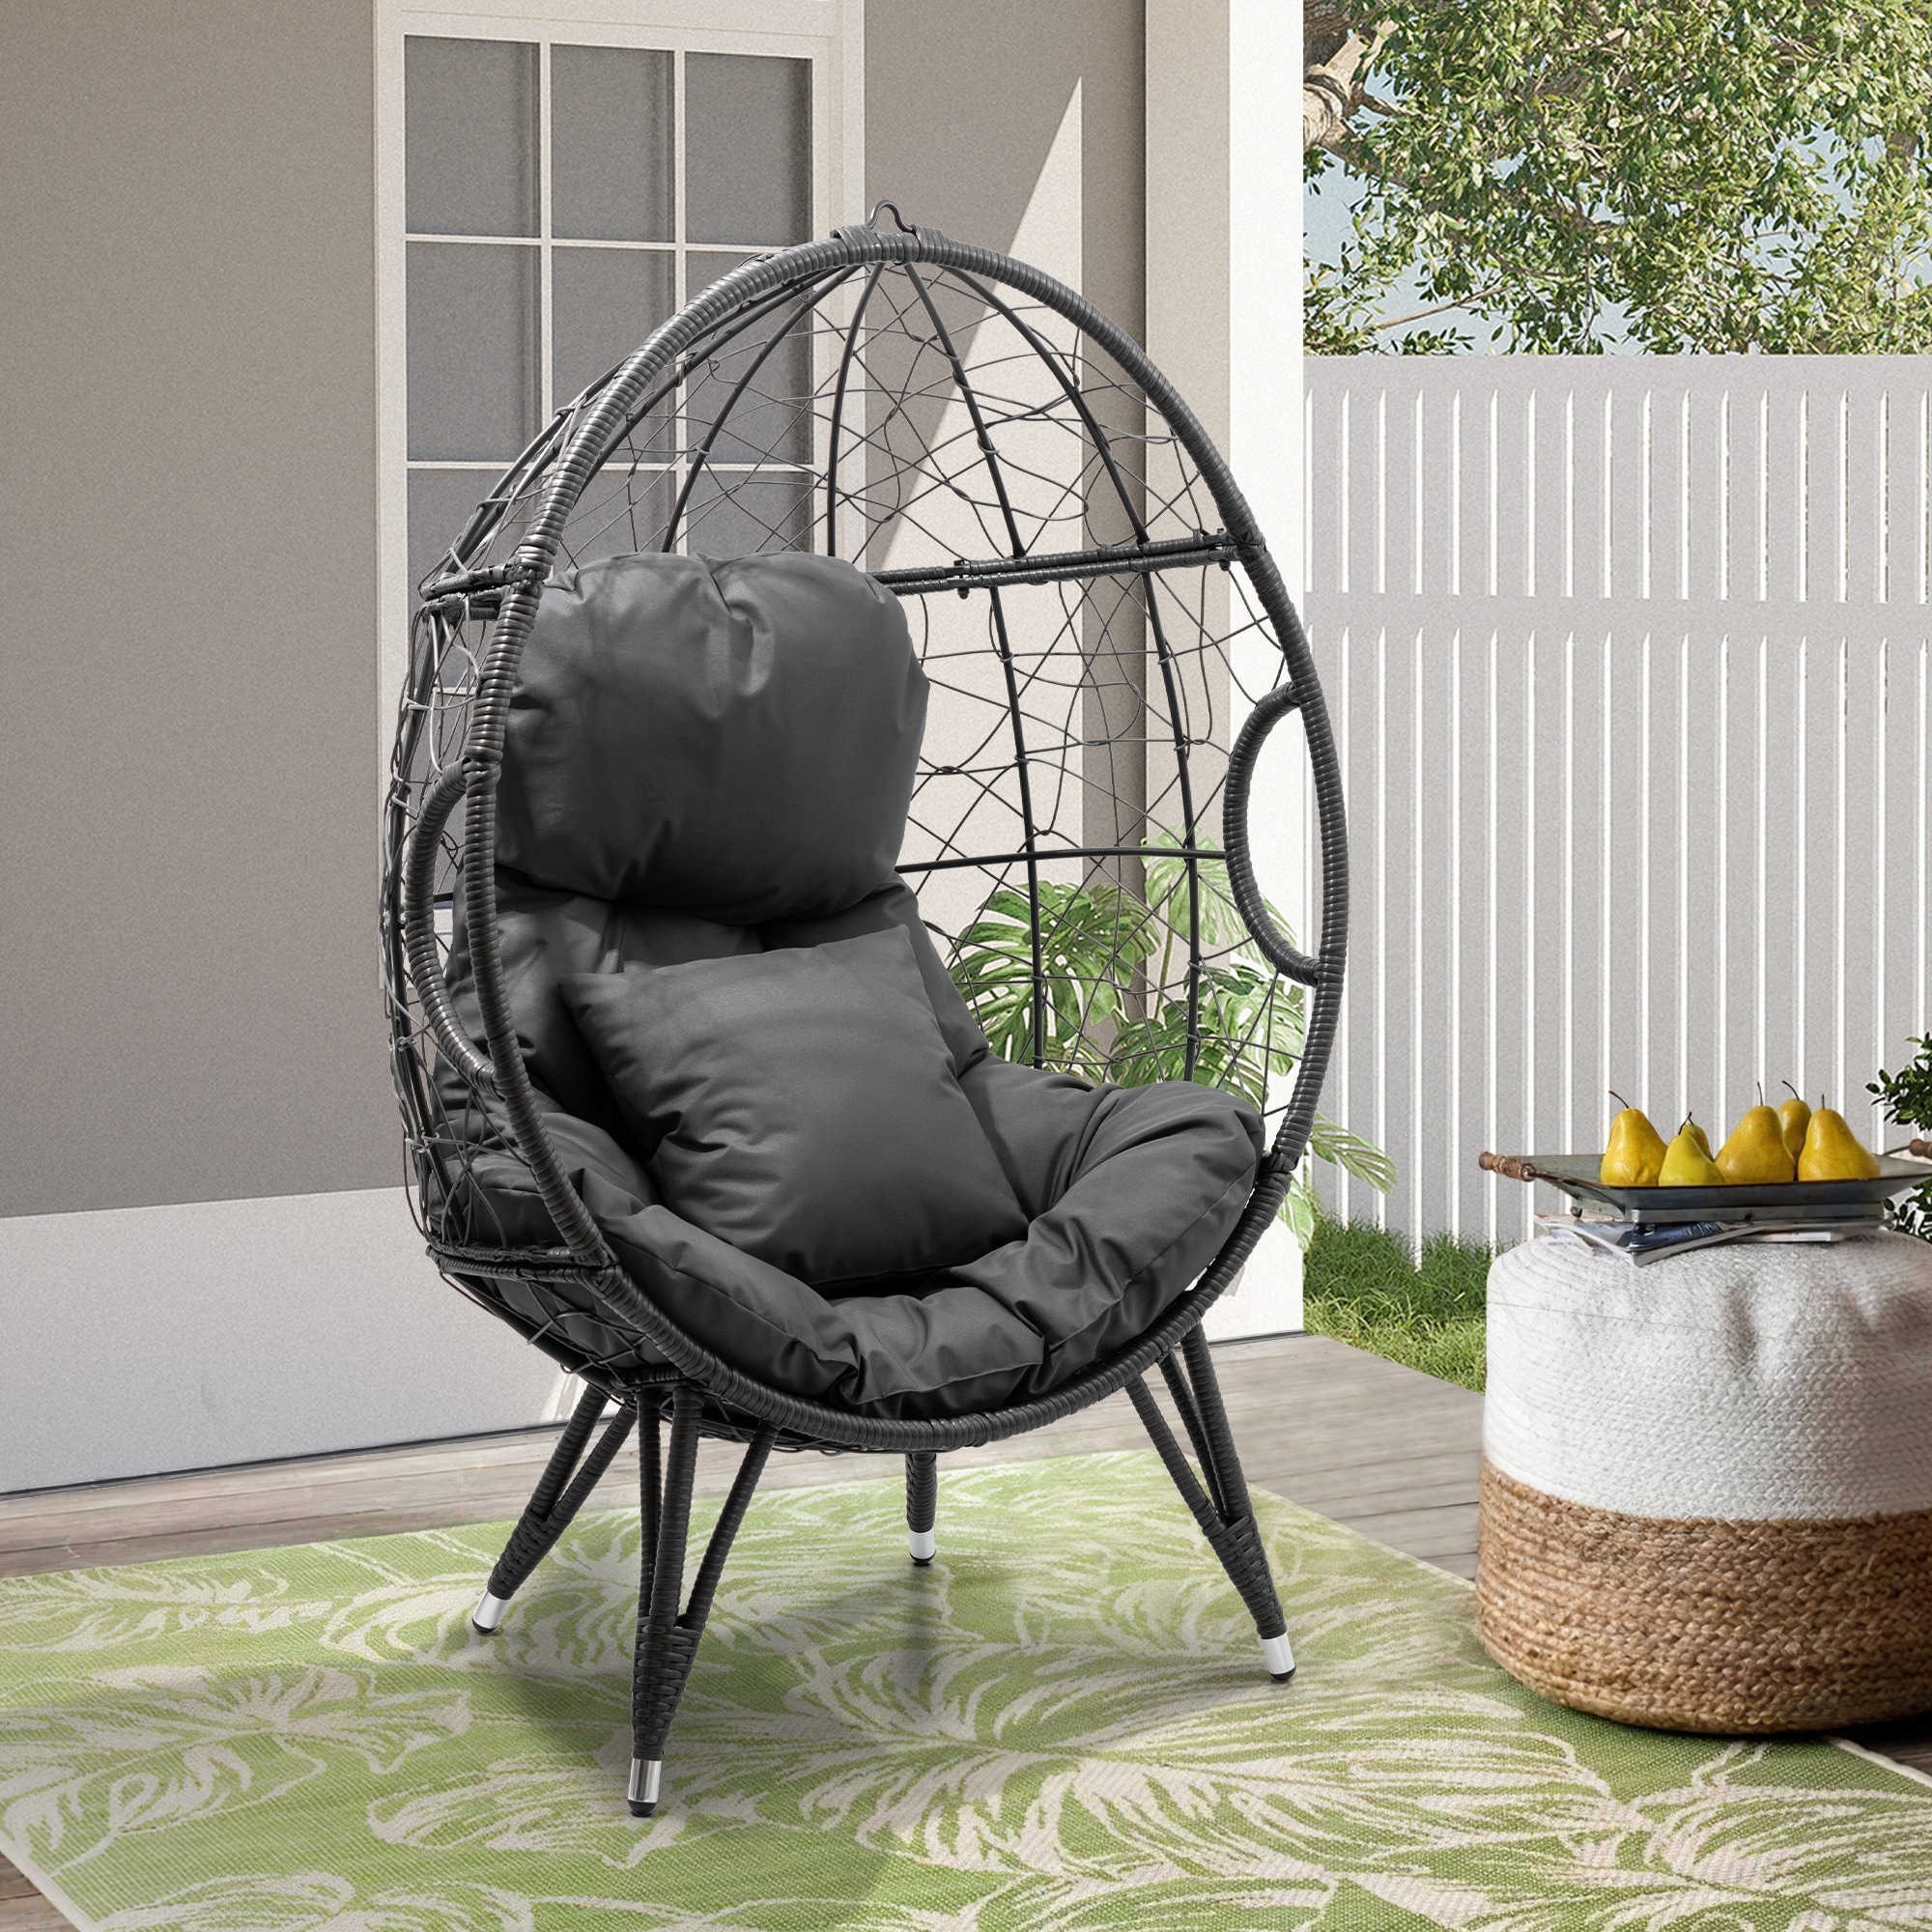 Pellebant Outdoor Wicker Egg Chair With Cushion